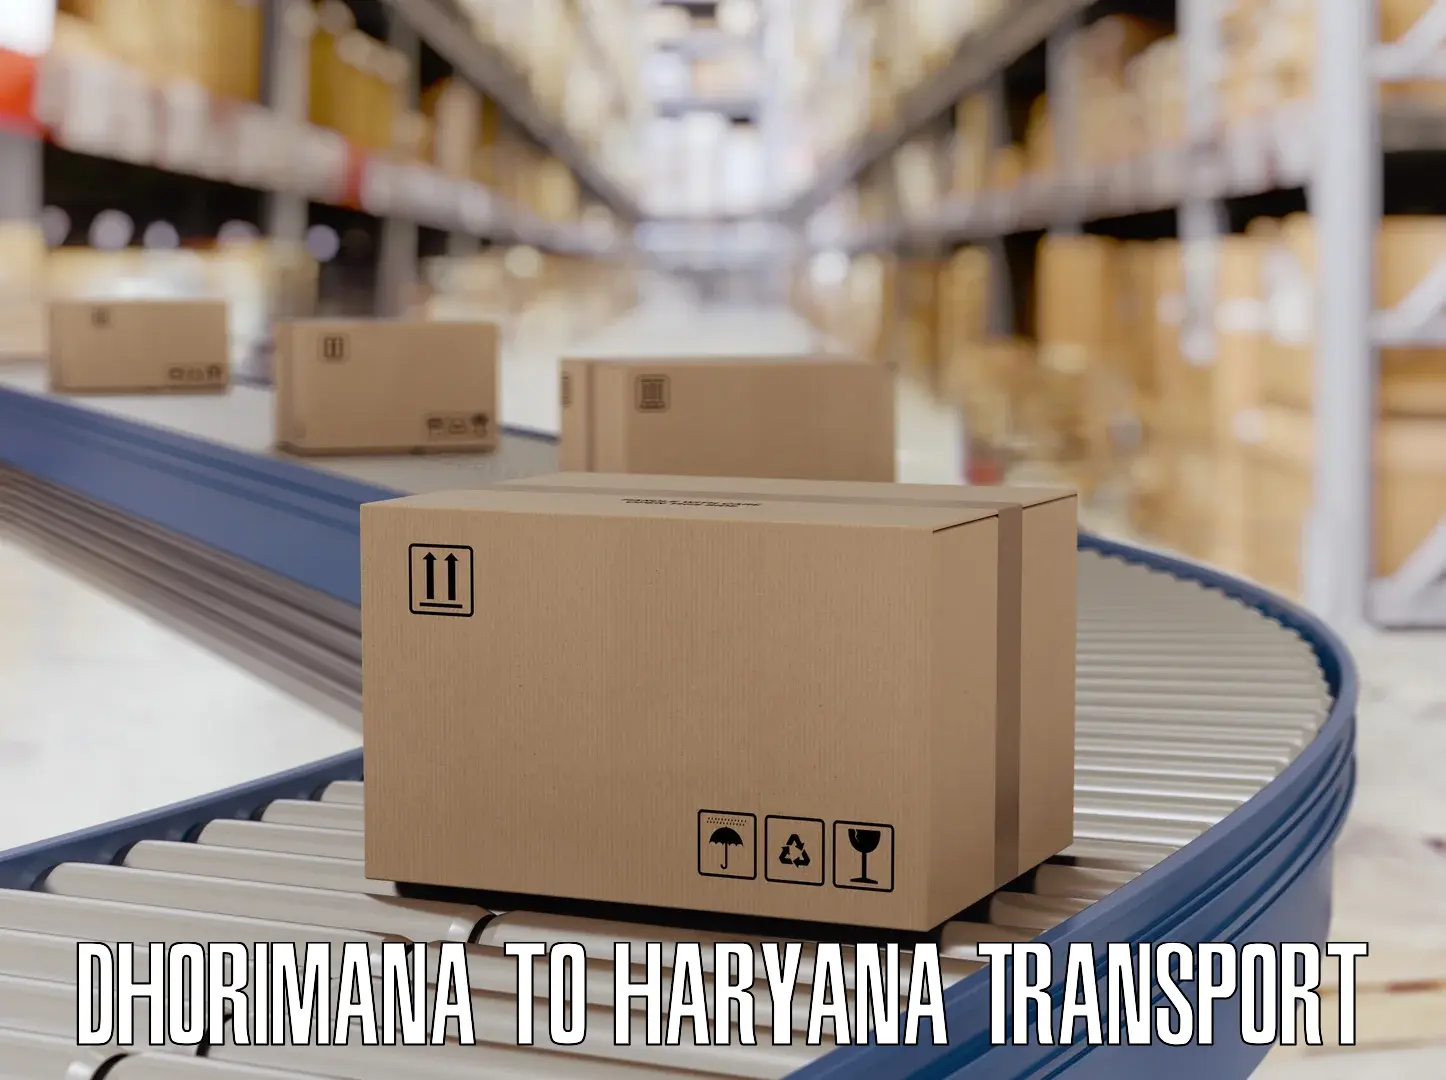 Parcel transport services in Dhorimana to Maharshi Dayanand University Rohtak